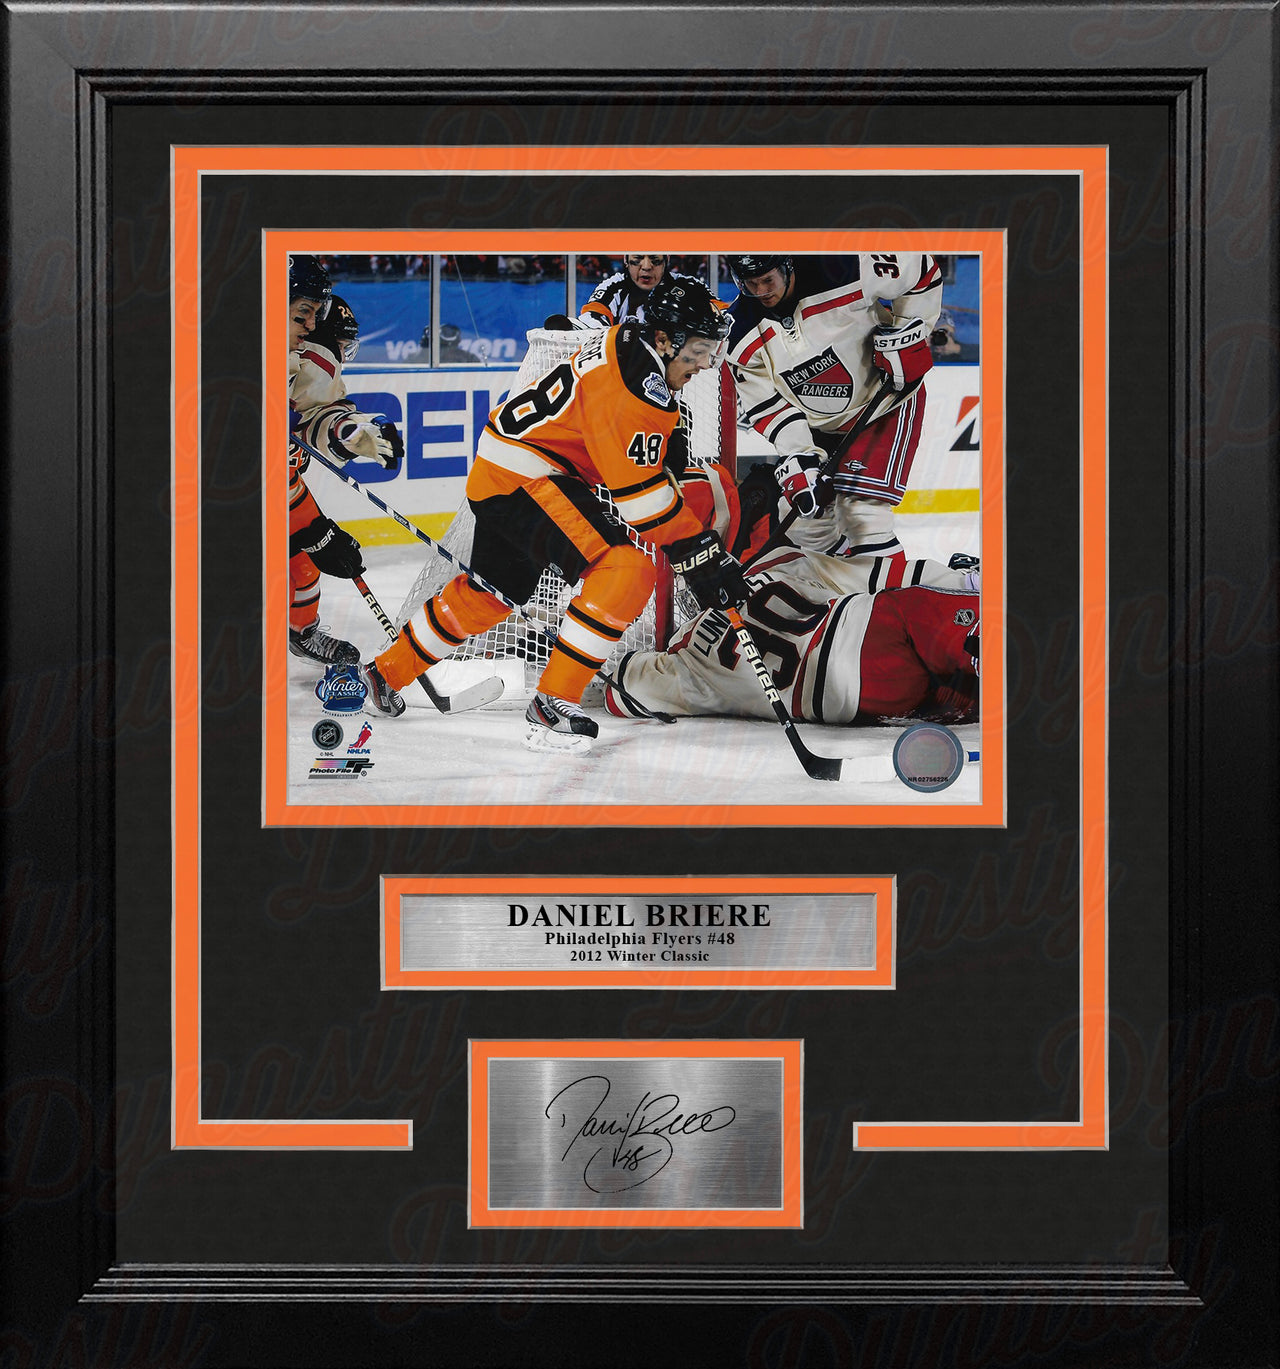 Daniel Briere 2012 Winter Classic Philadelphia Flyers 8" x 10" Framed Photo with Engraved Autograph